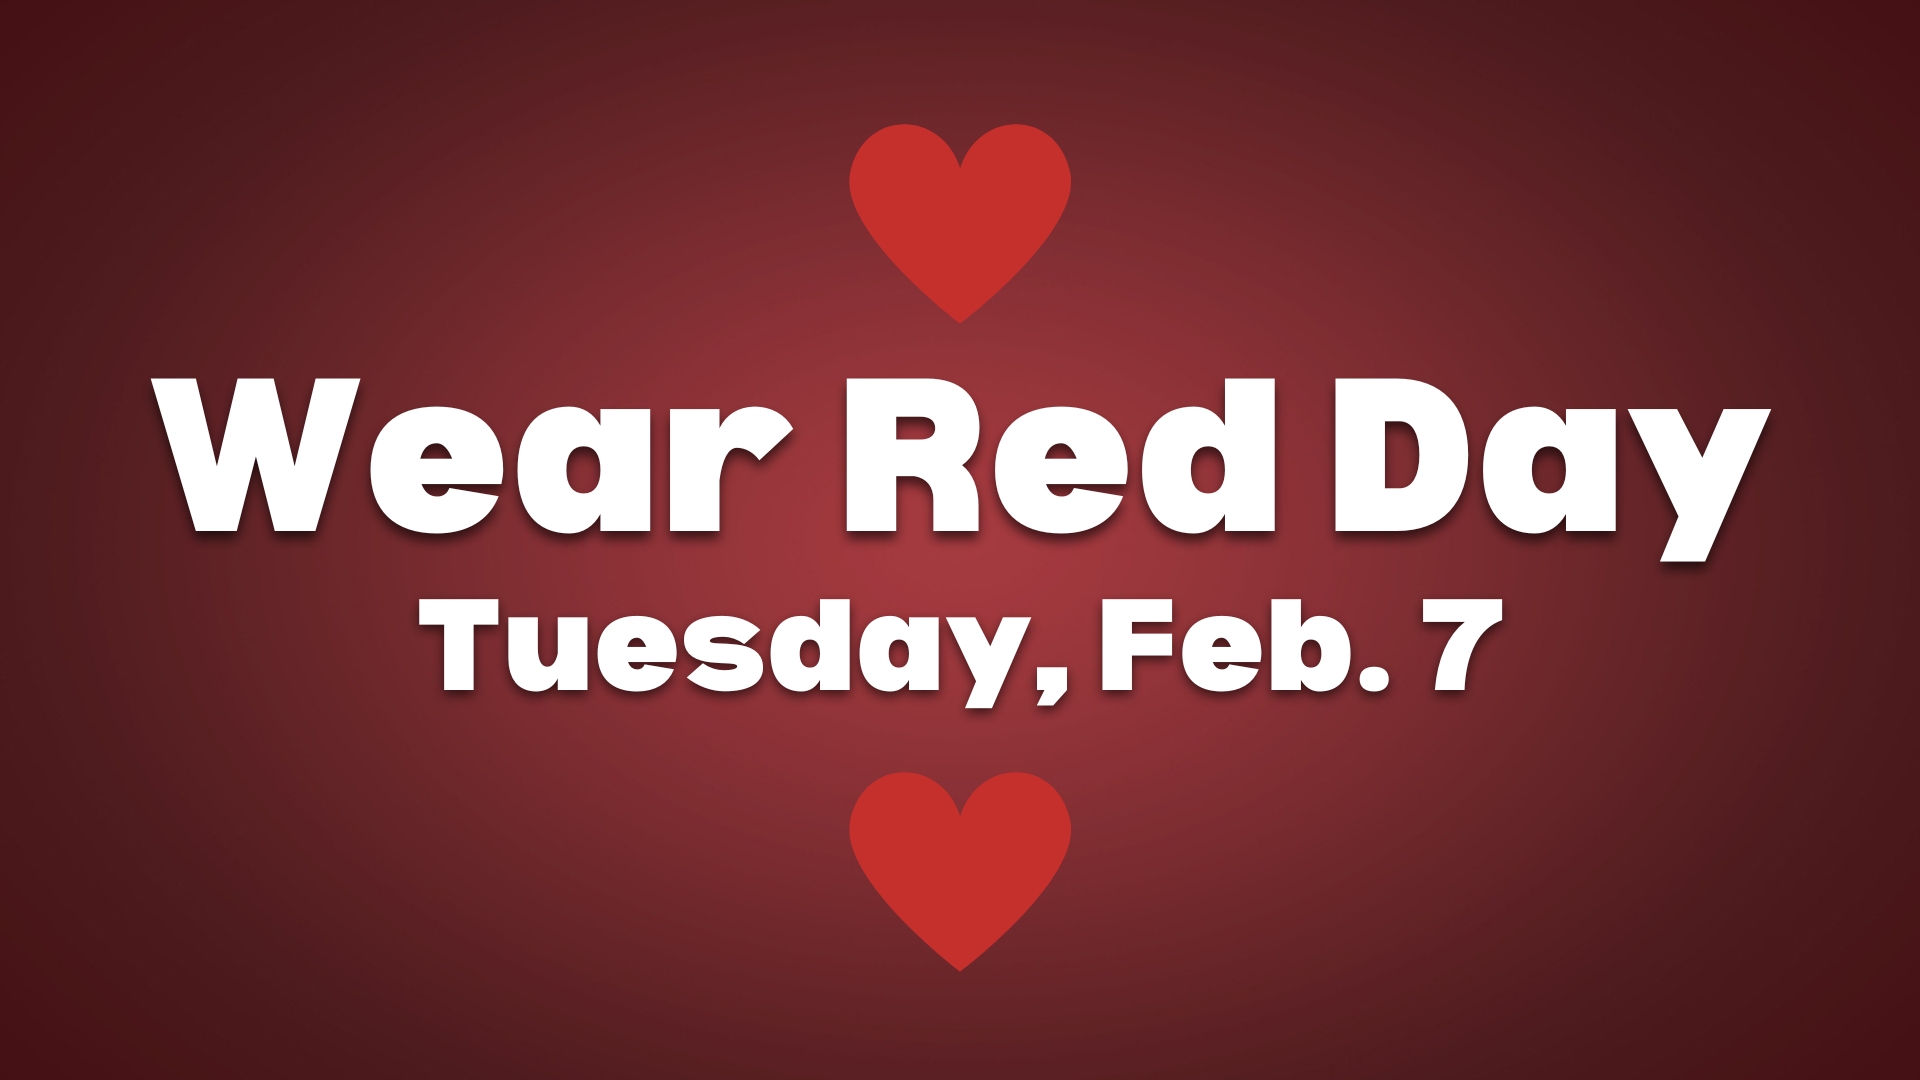 NATIONAL WEAR RED DAY - February 7, 2025 - National Today